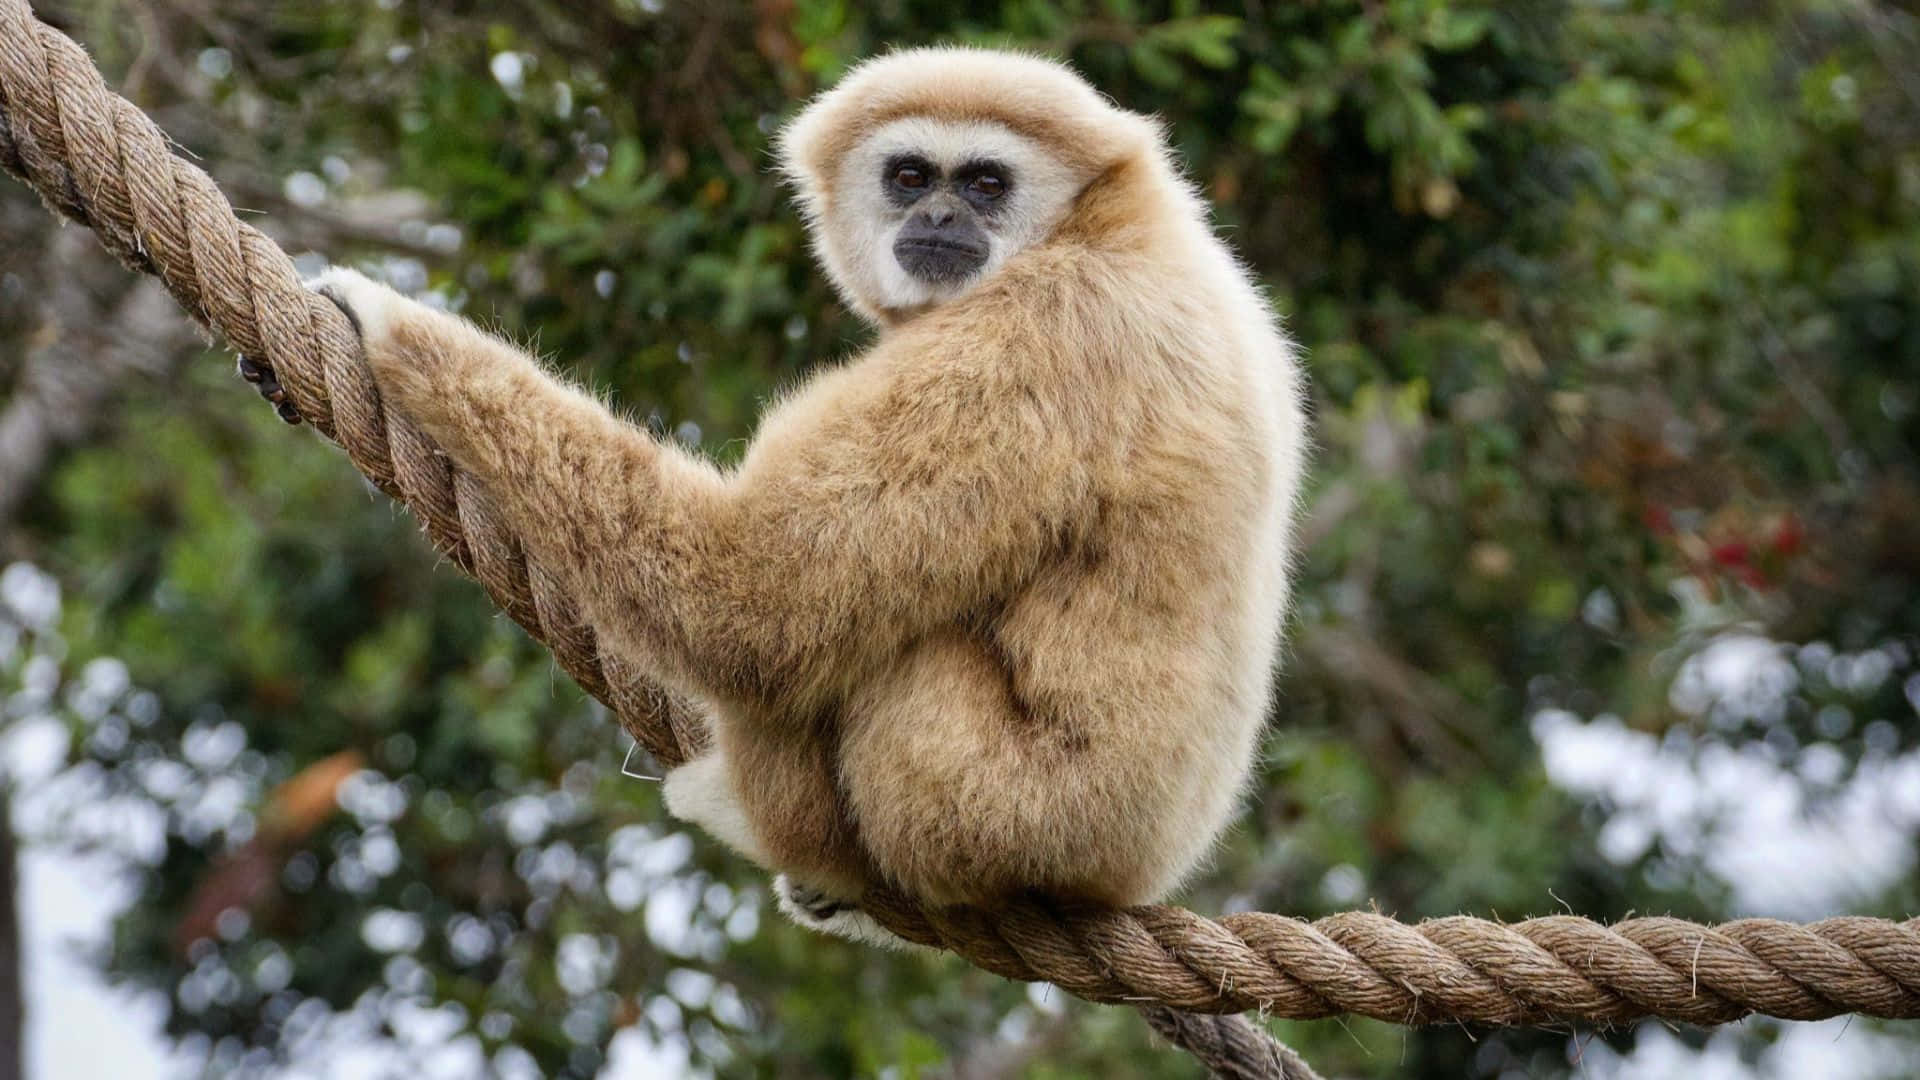 A Gibbon leaps from tree to tree in vivid 1080p clarity.